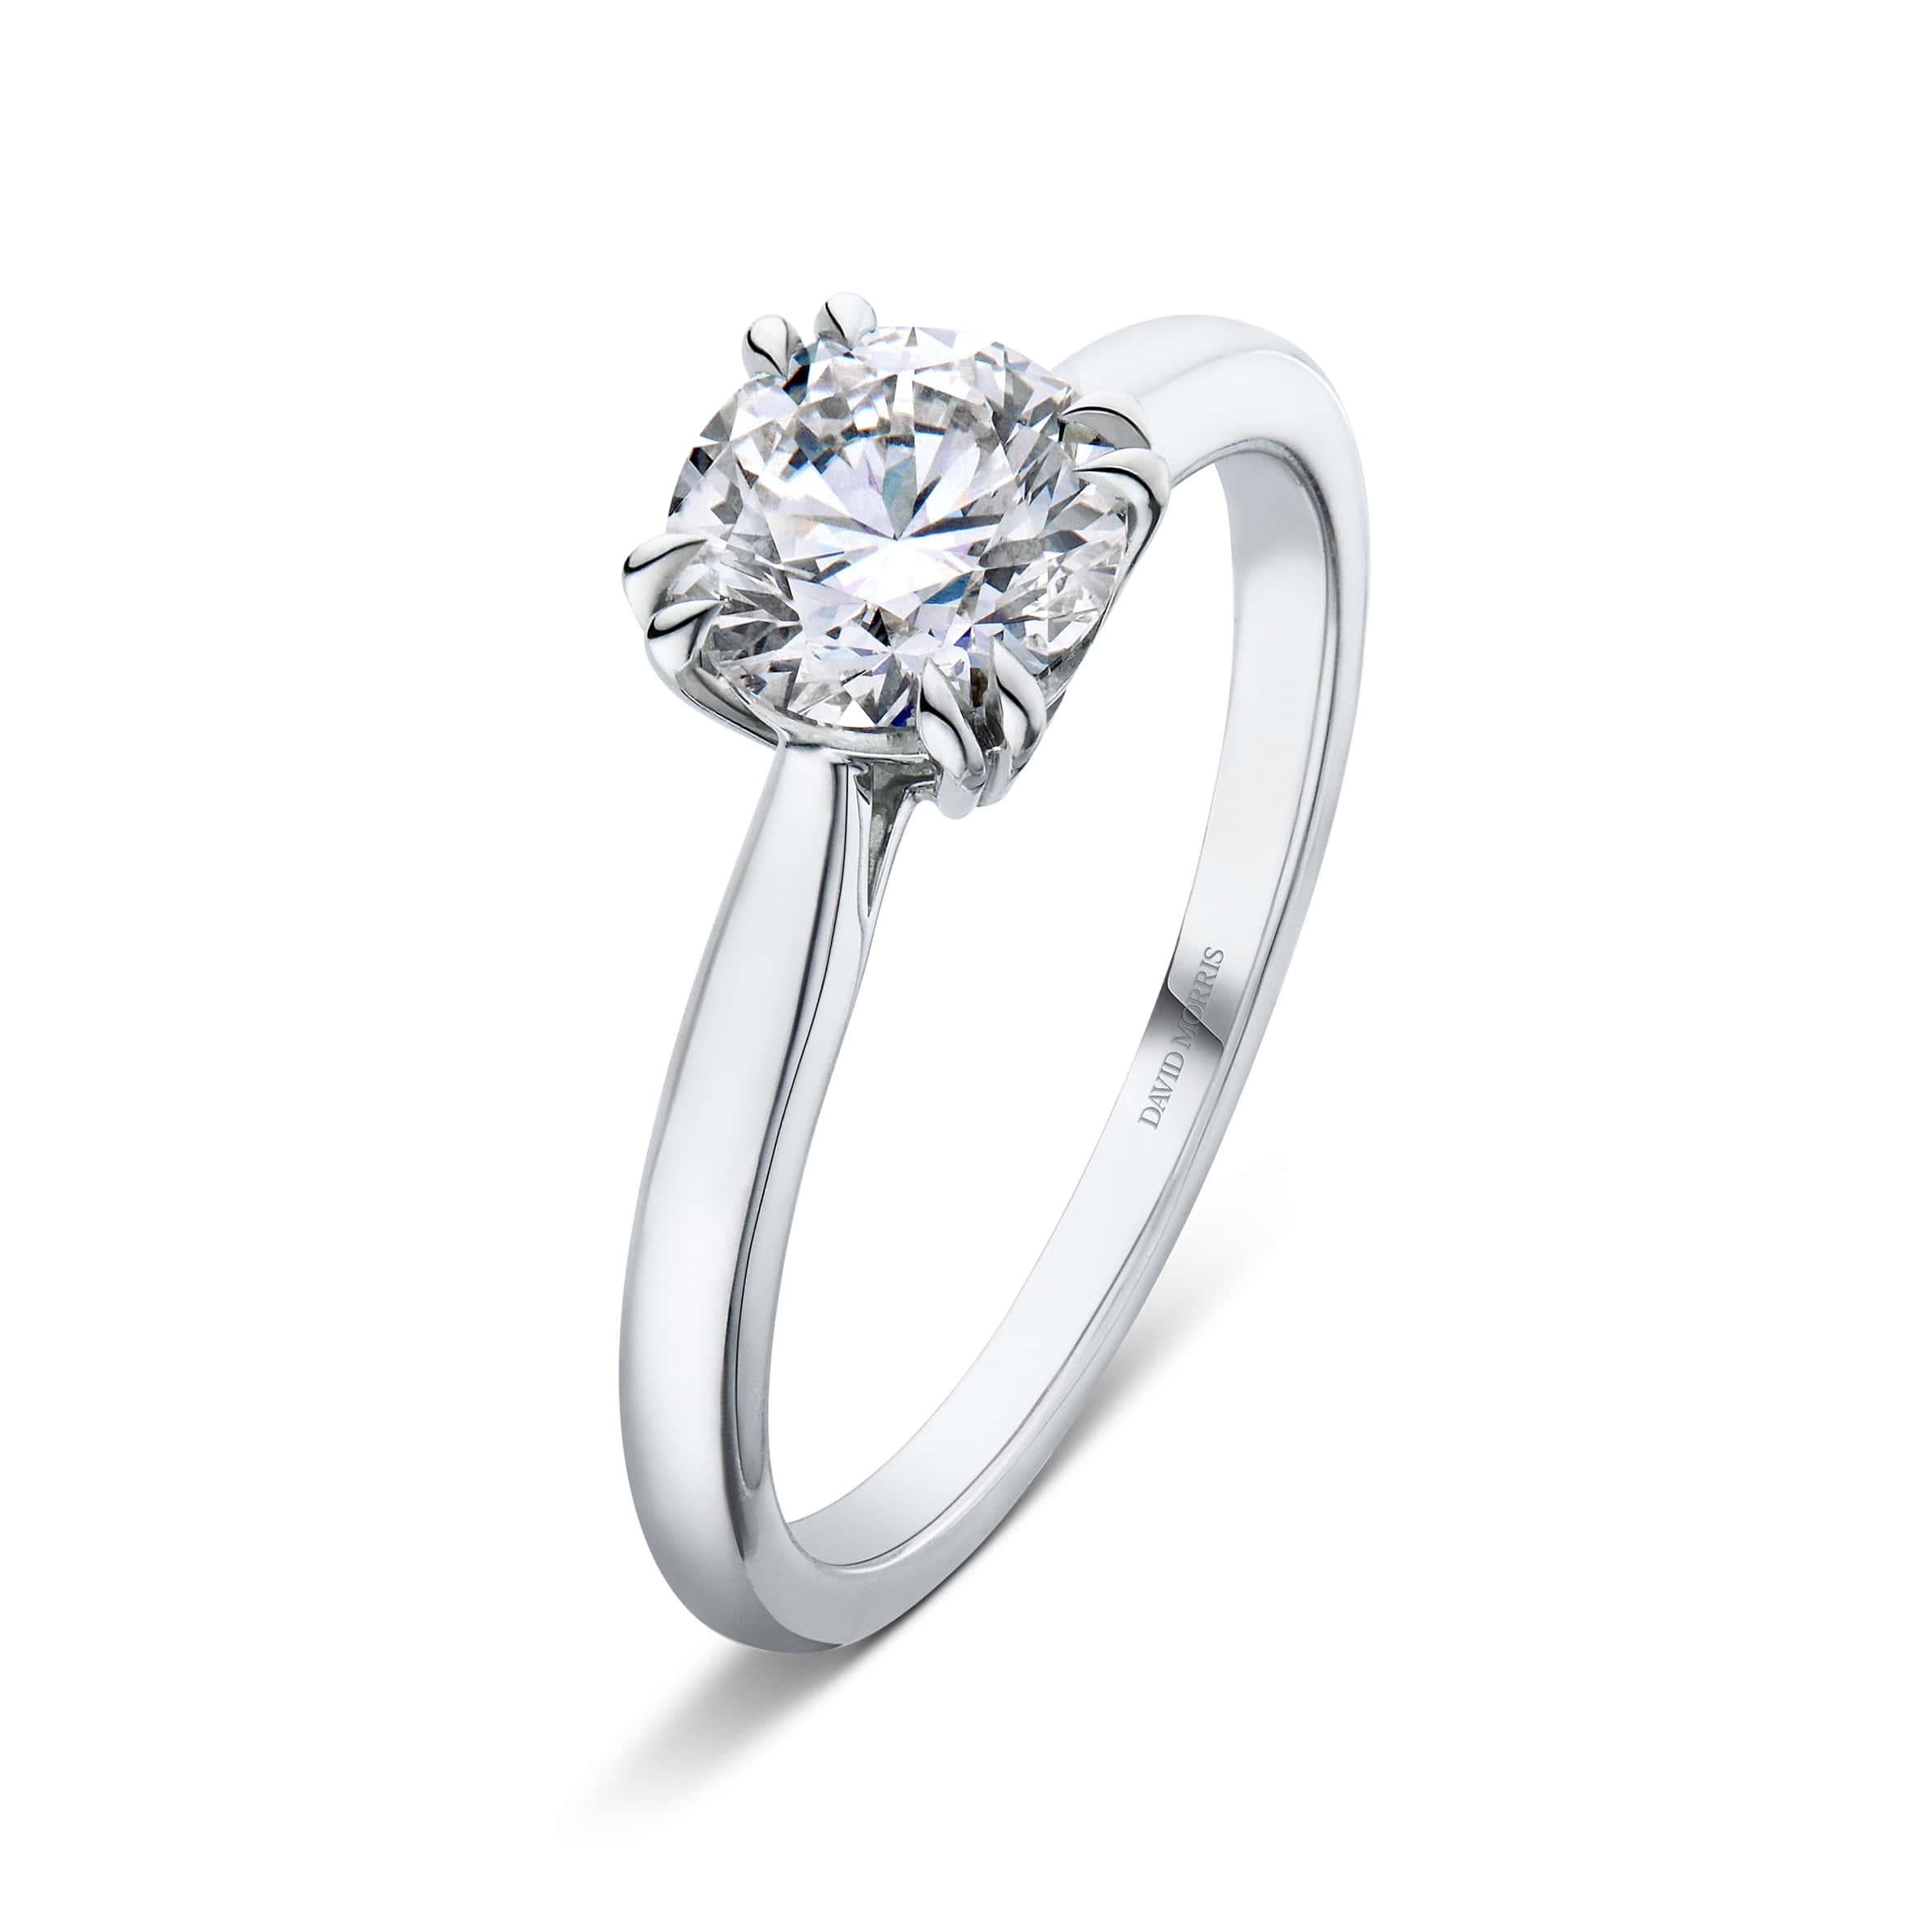 This classic 18-carat white gold solitaire ring features a mesmerizing 1.01-carat round brilliant white diamond at it's centre. Set in lustrous 18-carat white gold, the metal beautifully enhances the diamond's radiance, creating a harmonious blend